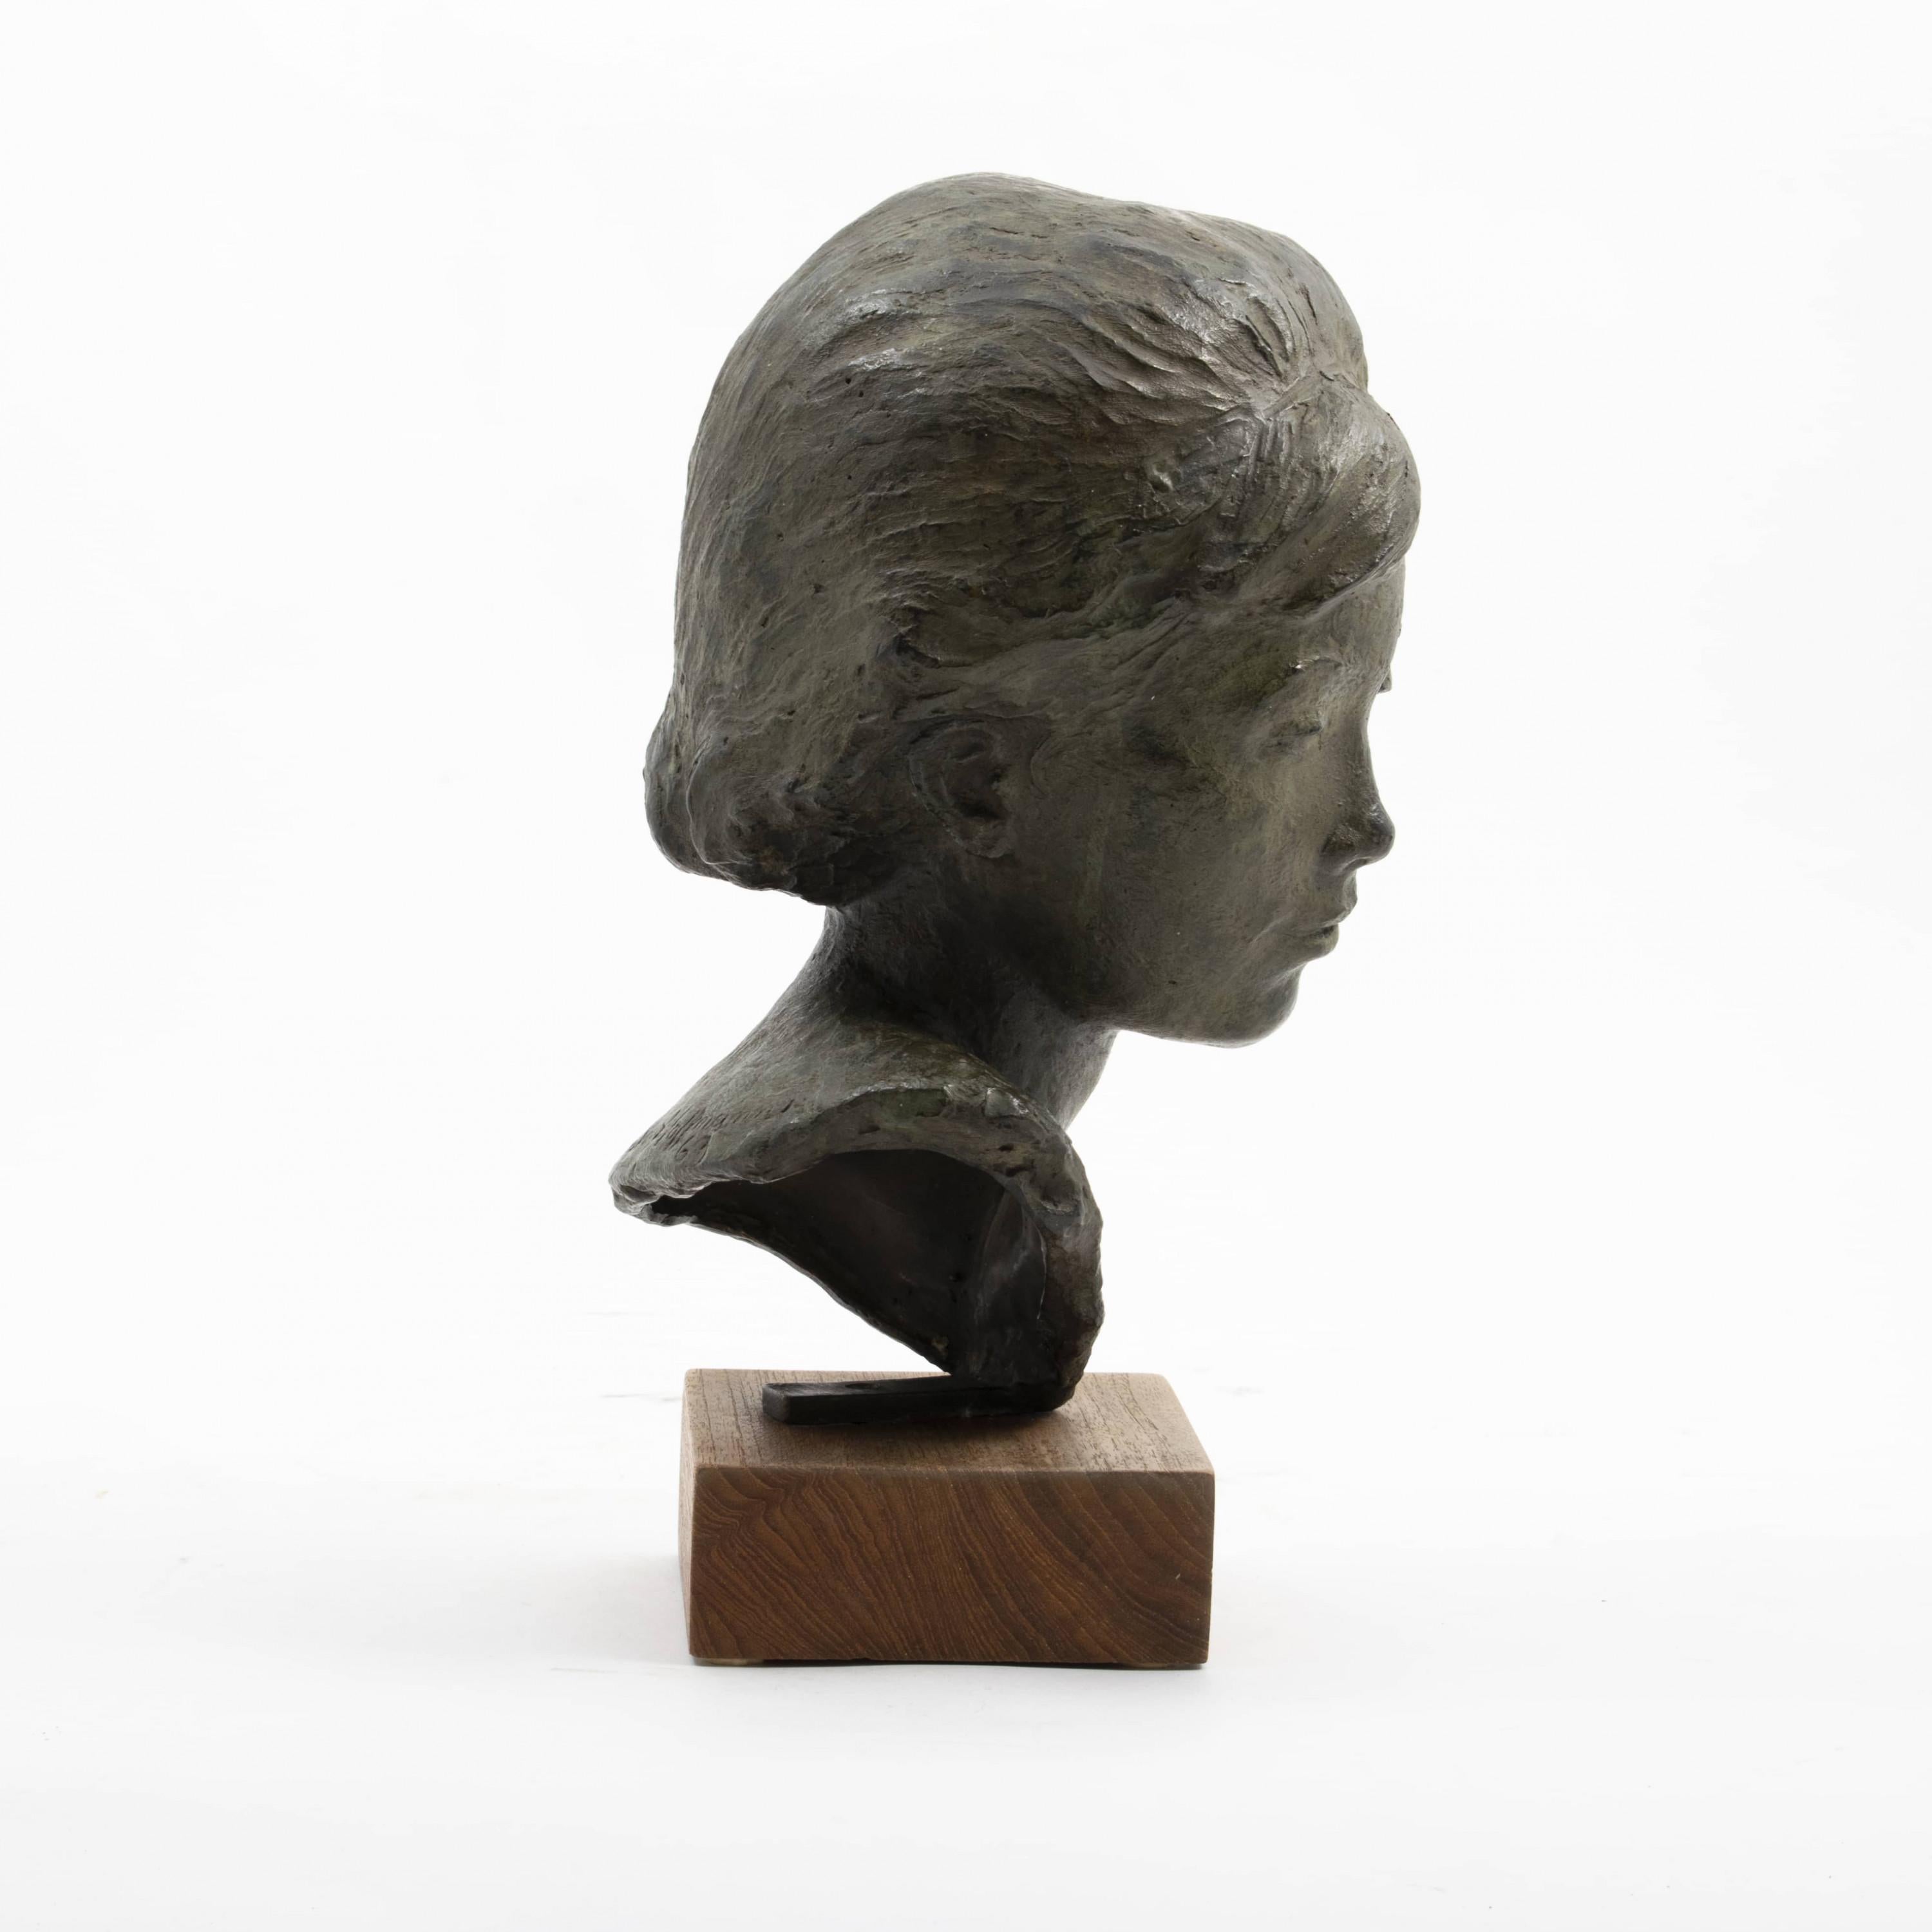 Anker Hoffmann 1904-1985.

Sculpture in green patinated bronze depicting a portrait of a young woman. Mounted on a teak plinth.
Signed Anker Hoffmann 63
Height incl. plinth: 36 cm.